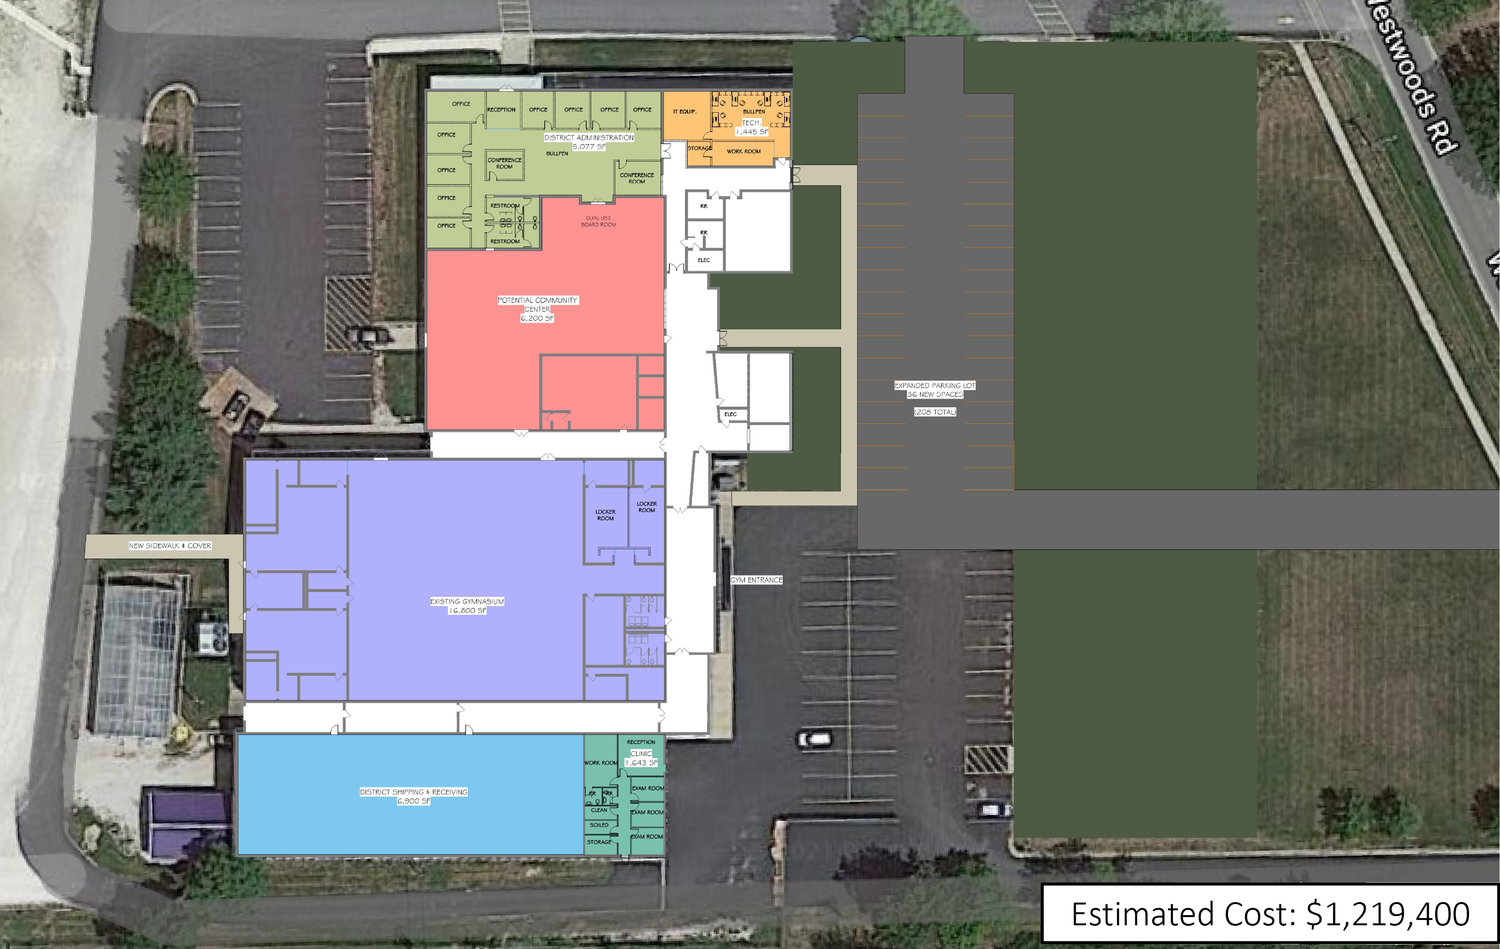 This image, taken from a Wright City School Board presentation, shows plans for Wright City current high school building after a new school is constructed. The dark green and gray portion to the right shows where the eastern half of the building will be demolished.